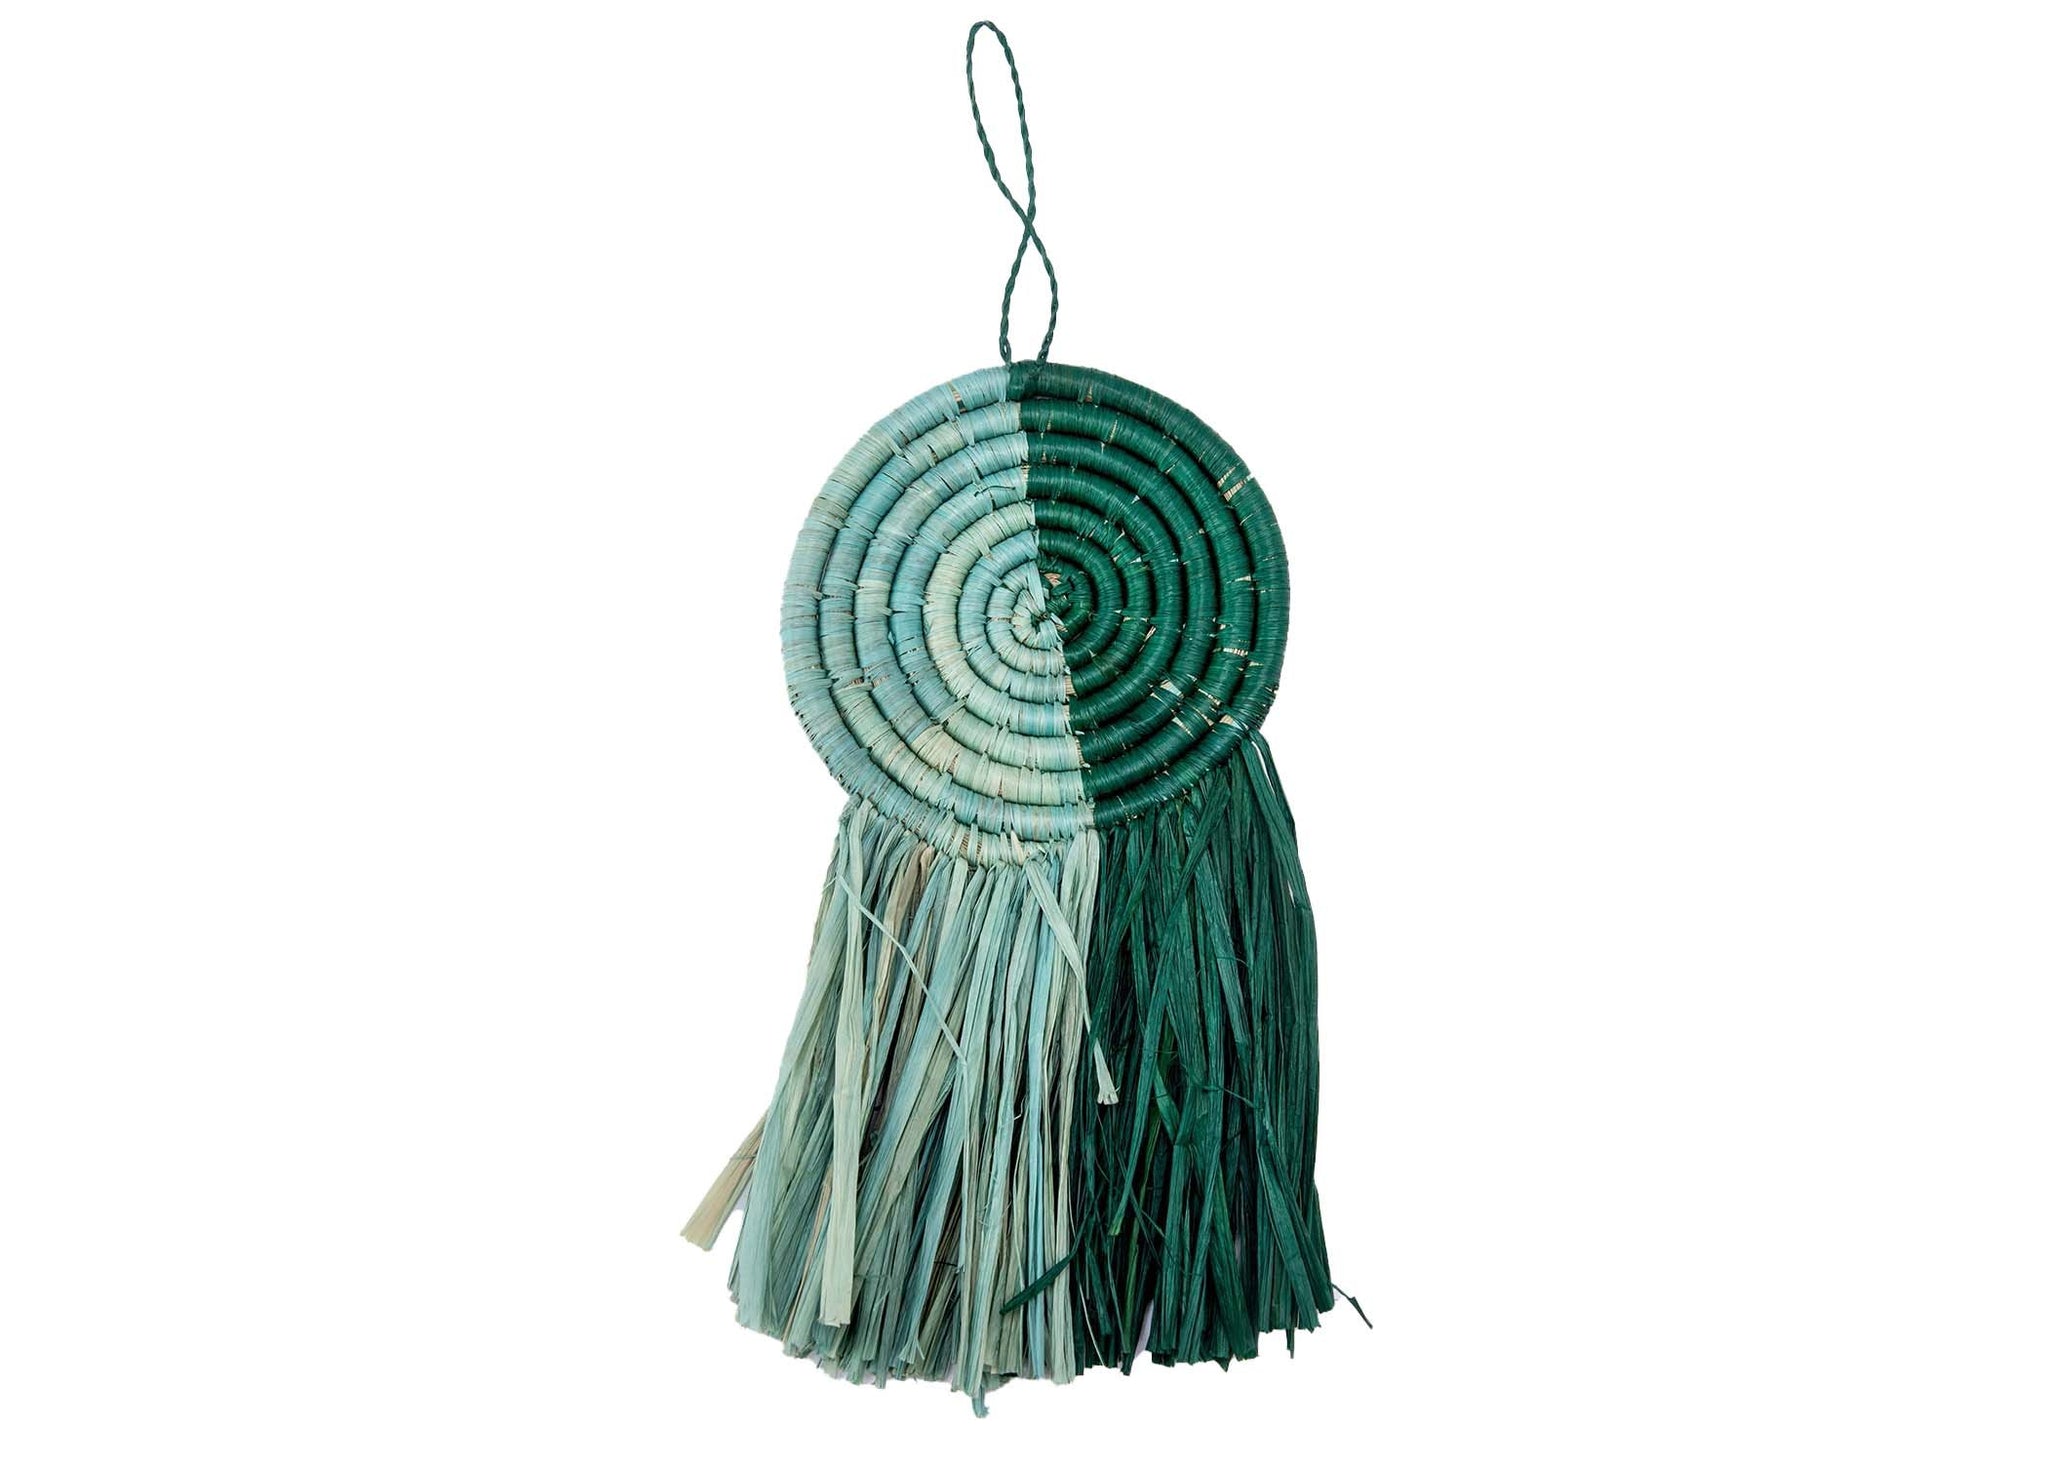 Dally Ornament in Mist and Teal